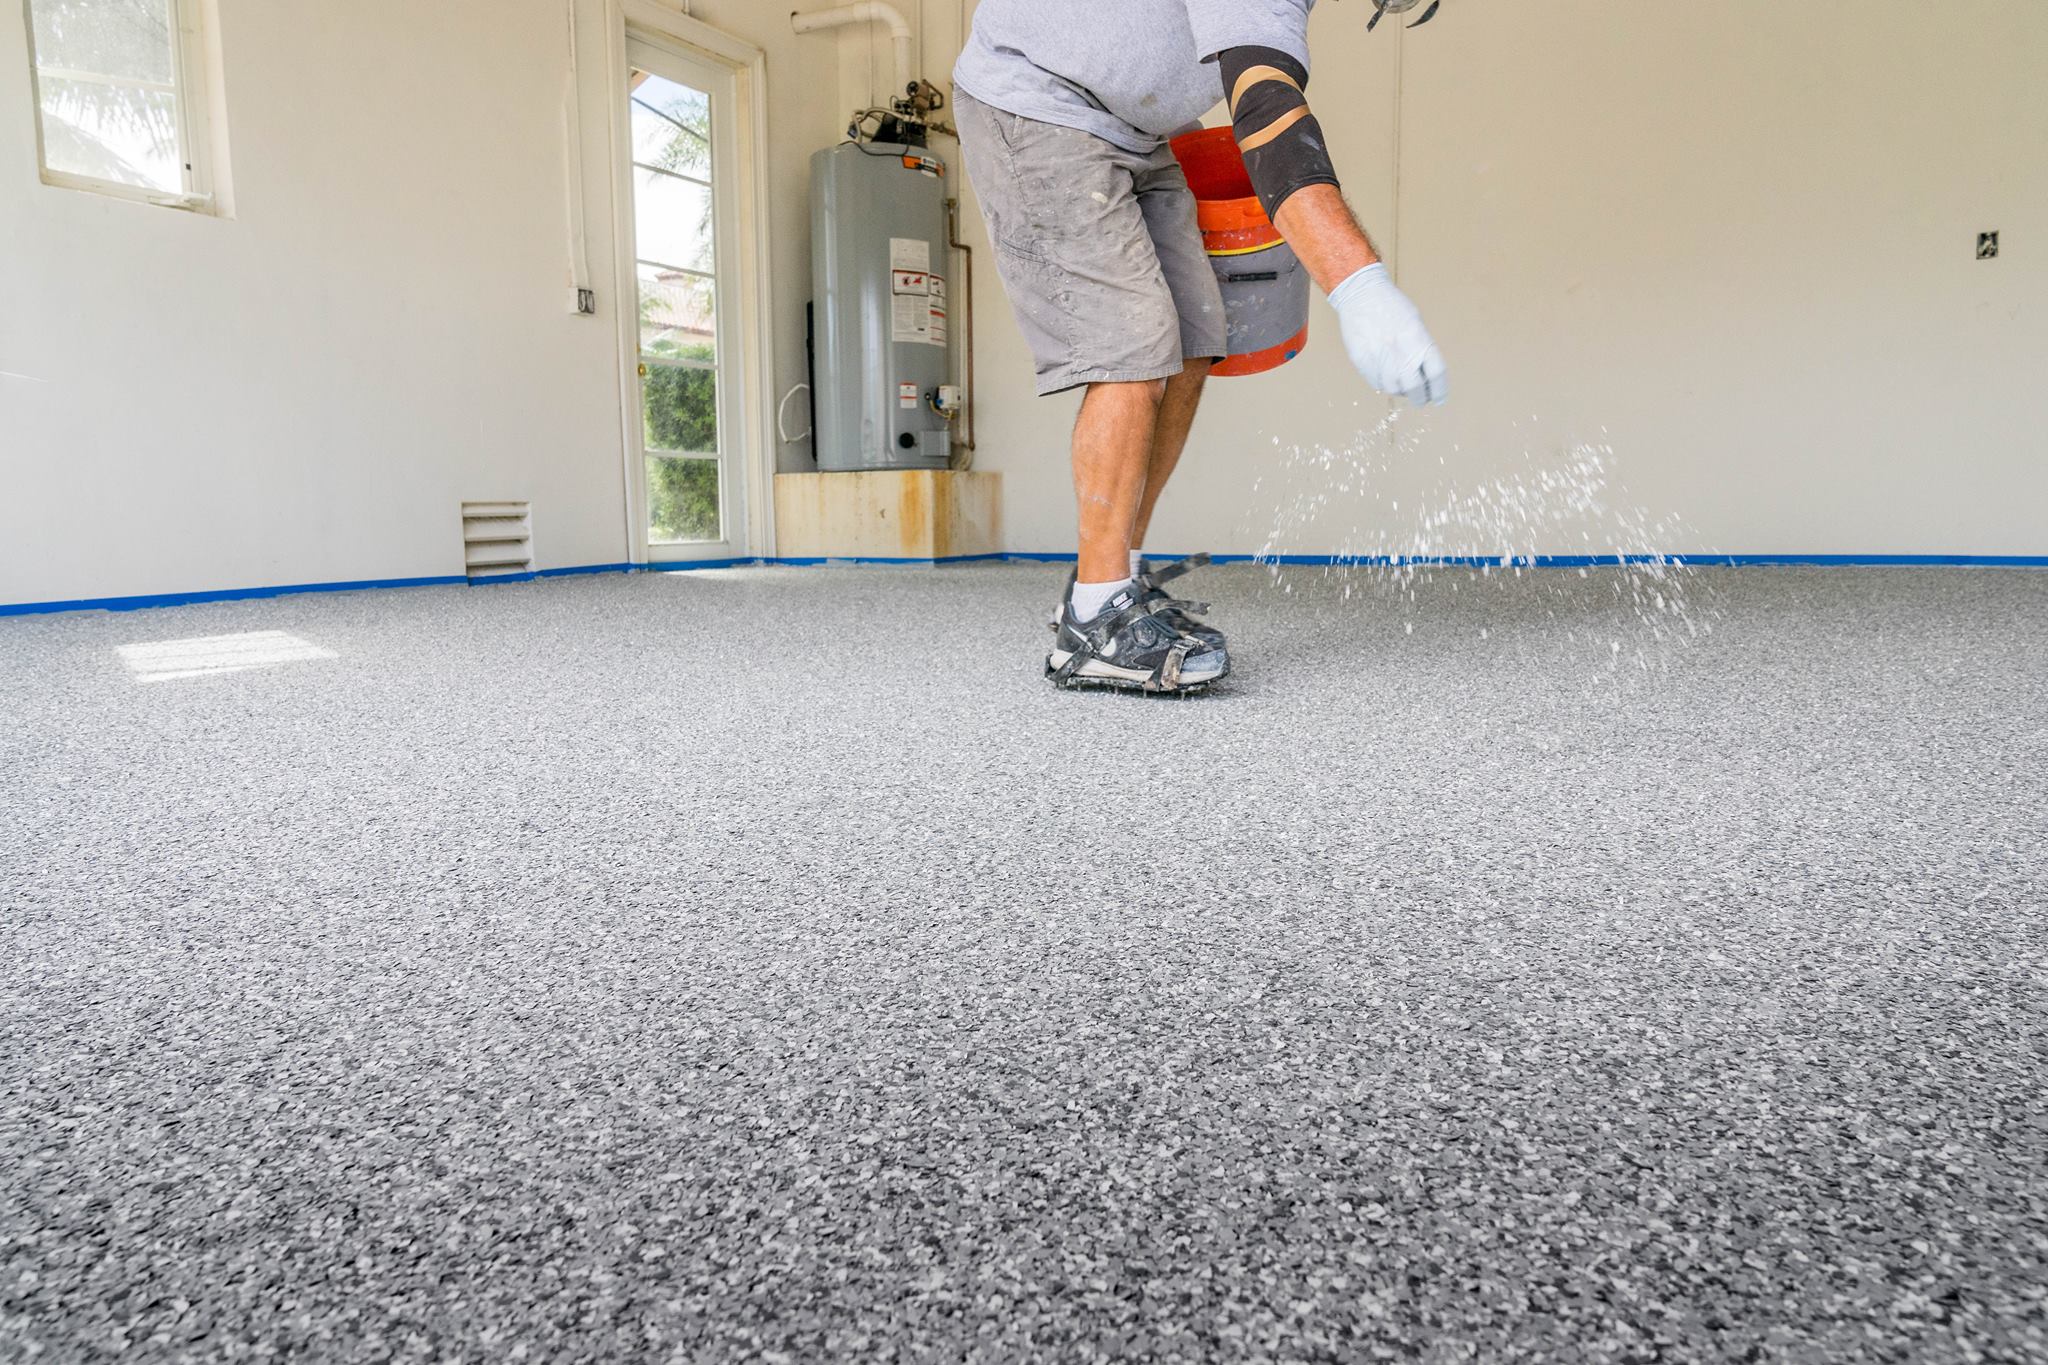 The Fundamental Benefits of Using Polyaspartic Floor Coatings - Xtreme Polishing Systems